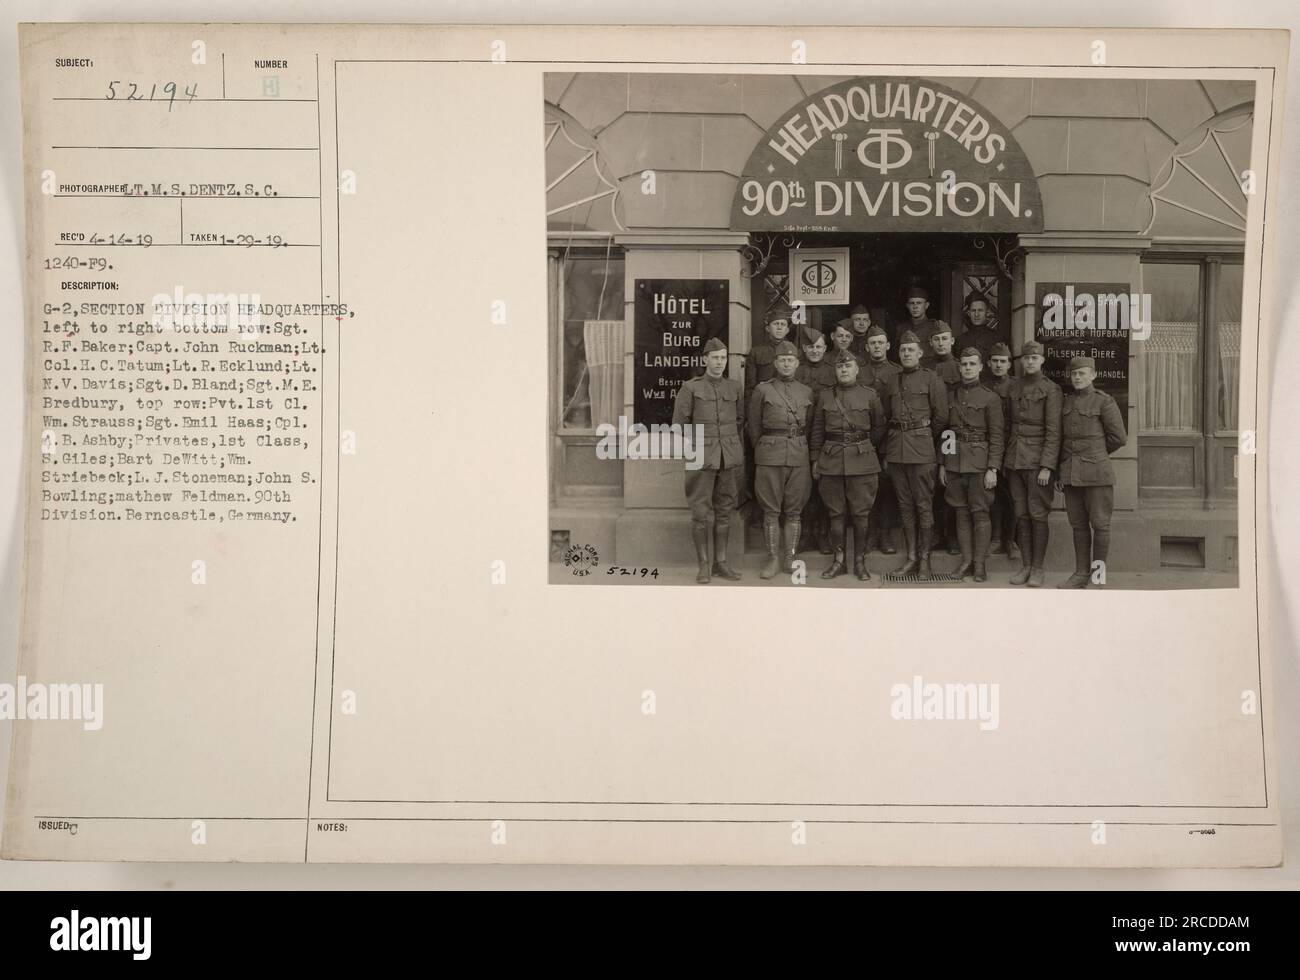 G-2 Section, Division Headquarters of the 90th Division in Berncastle, Germany. The photograph was taken on January 20, 1919, by T.M.S. Dentz. The individuals in the photo are: Sgt. ISSUED R.F. Baker, Capt. John Ruckman, Lt. Col.H. C. Tatum, Lt. R. Ecklund, Lt. M.V. Davis, Sgt. D. Bland, Sgt.M.E. Bredbury, Pvt. 1st Cl. Wm. Strauss, Sgt. Emil Haas, Cpl. A. B. Ashby, Privates 1st Class 8. Giles, Bart DeWitt, M. Striebeck, L. J. Stoneman, John S. Bowling, and Mathew Feldman. The photo was taken at Hotel Zur Burg Landshut. Stock Photo